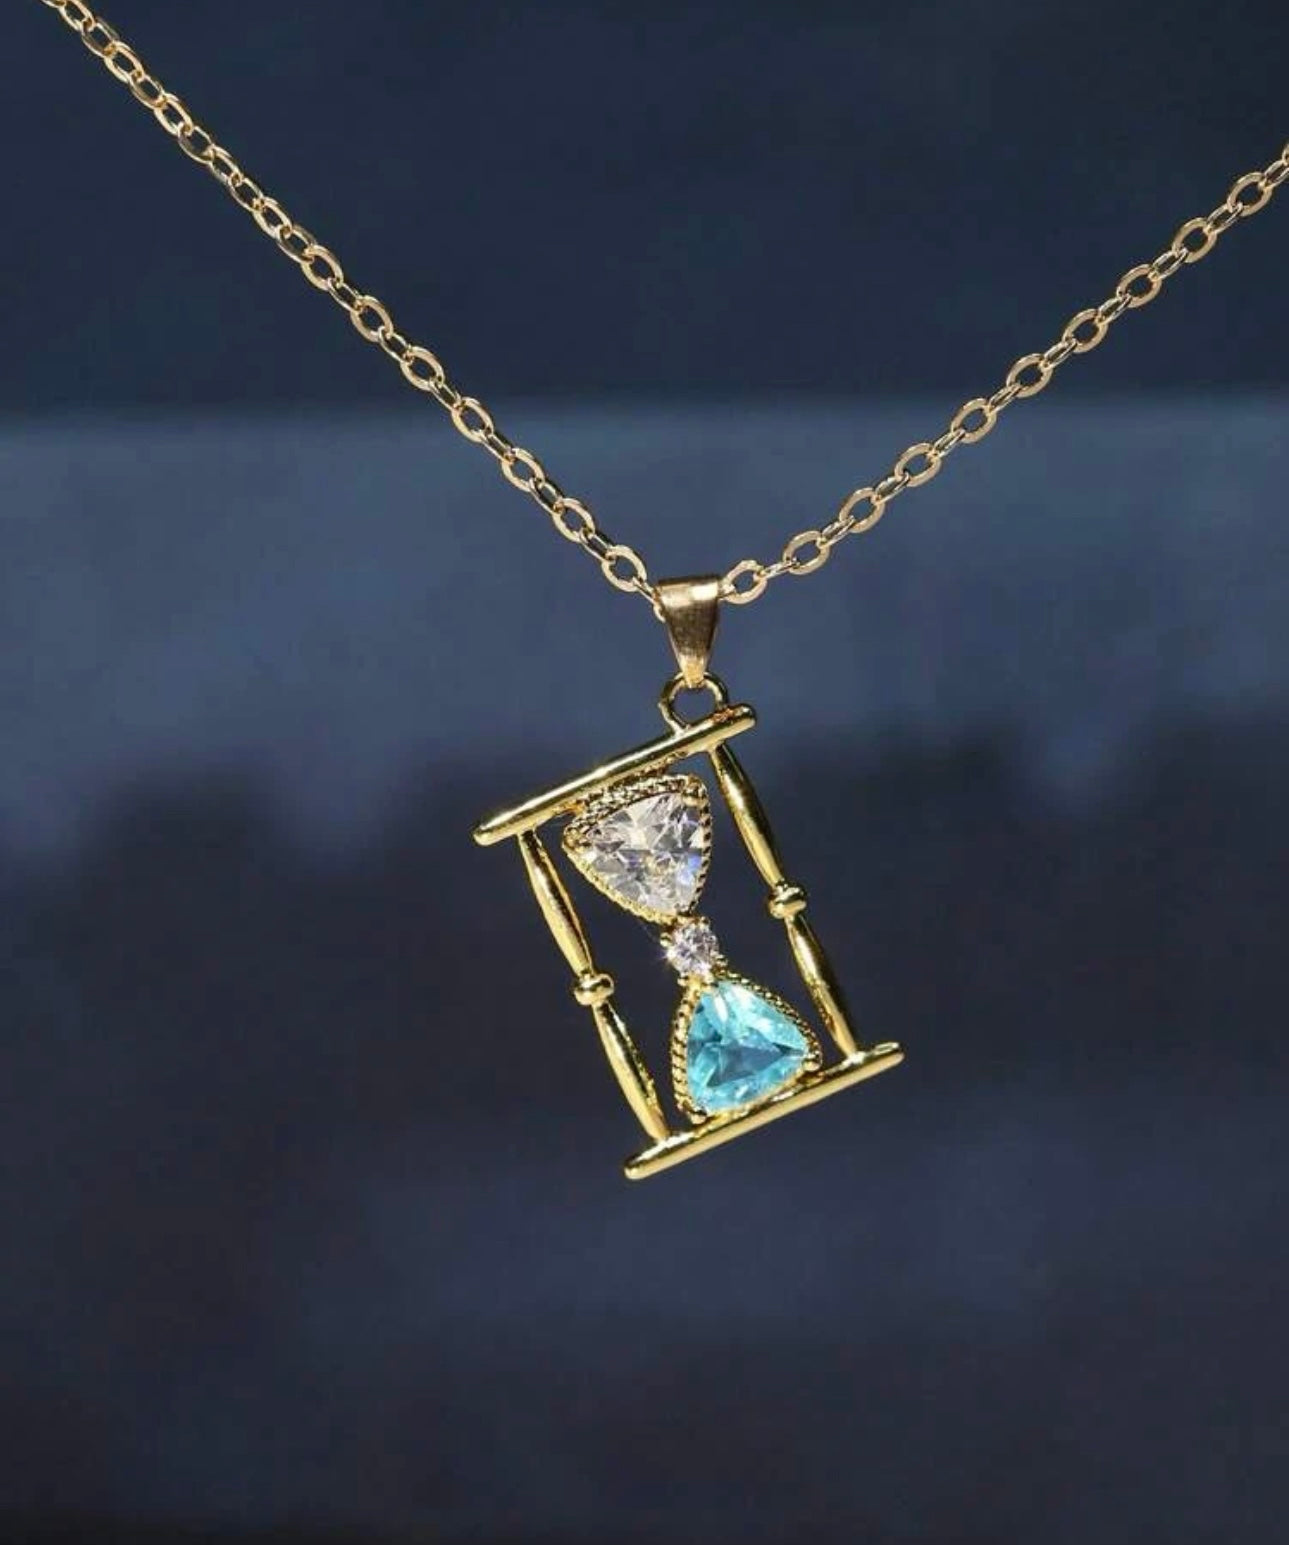 Hourglass necklace